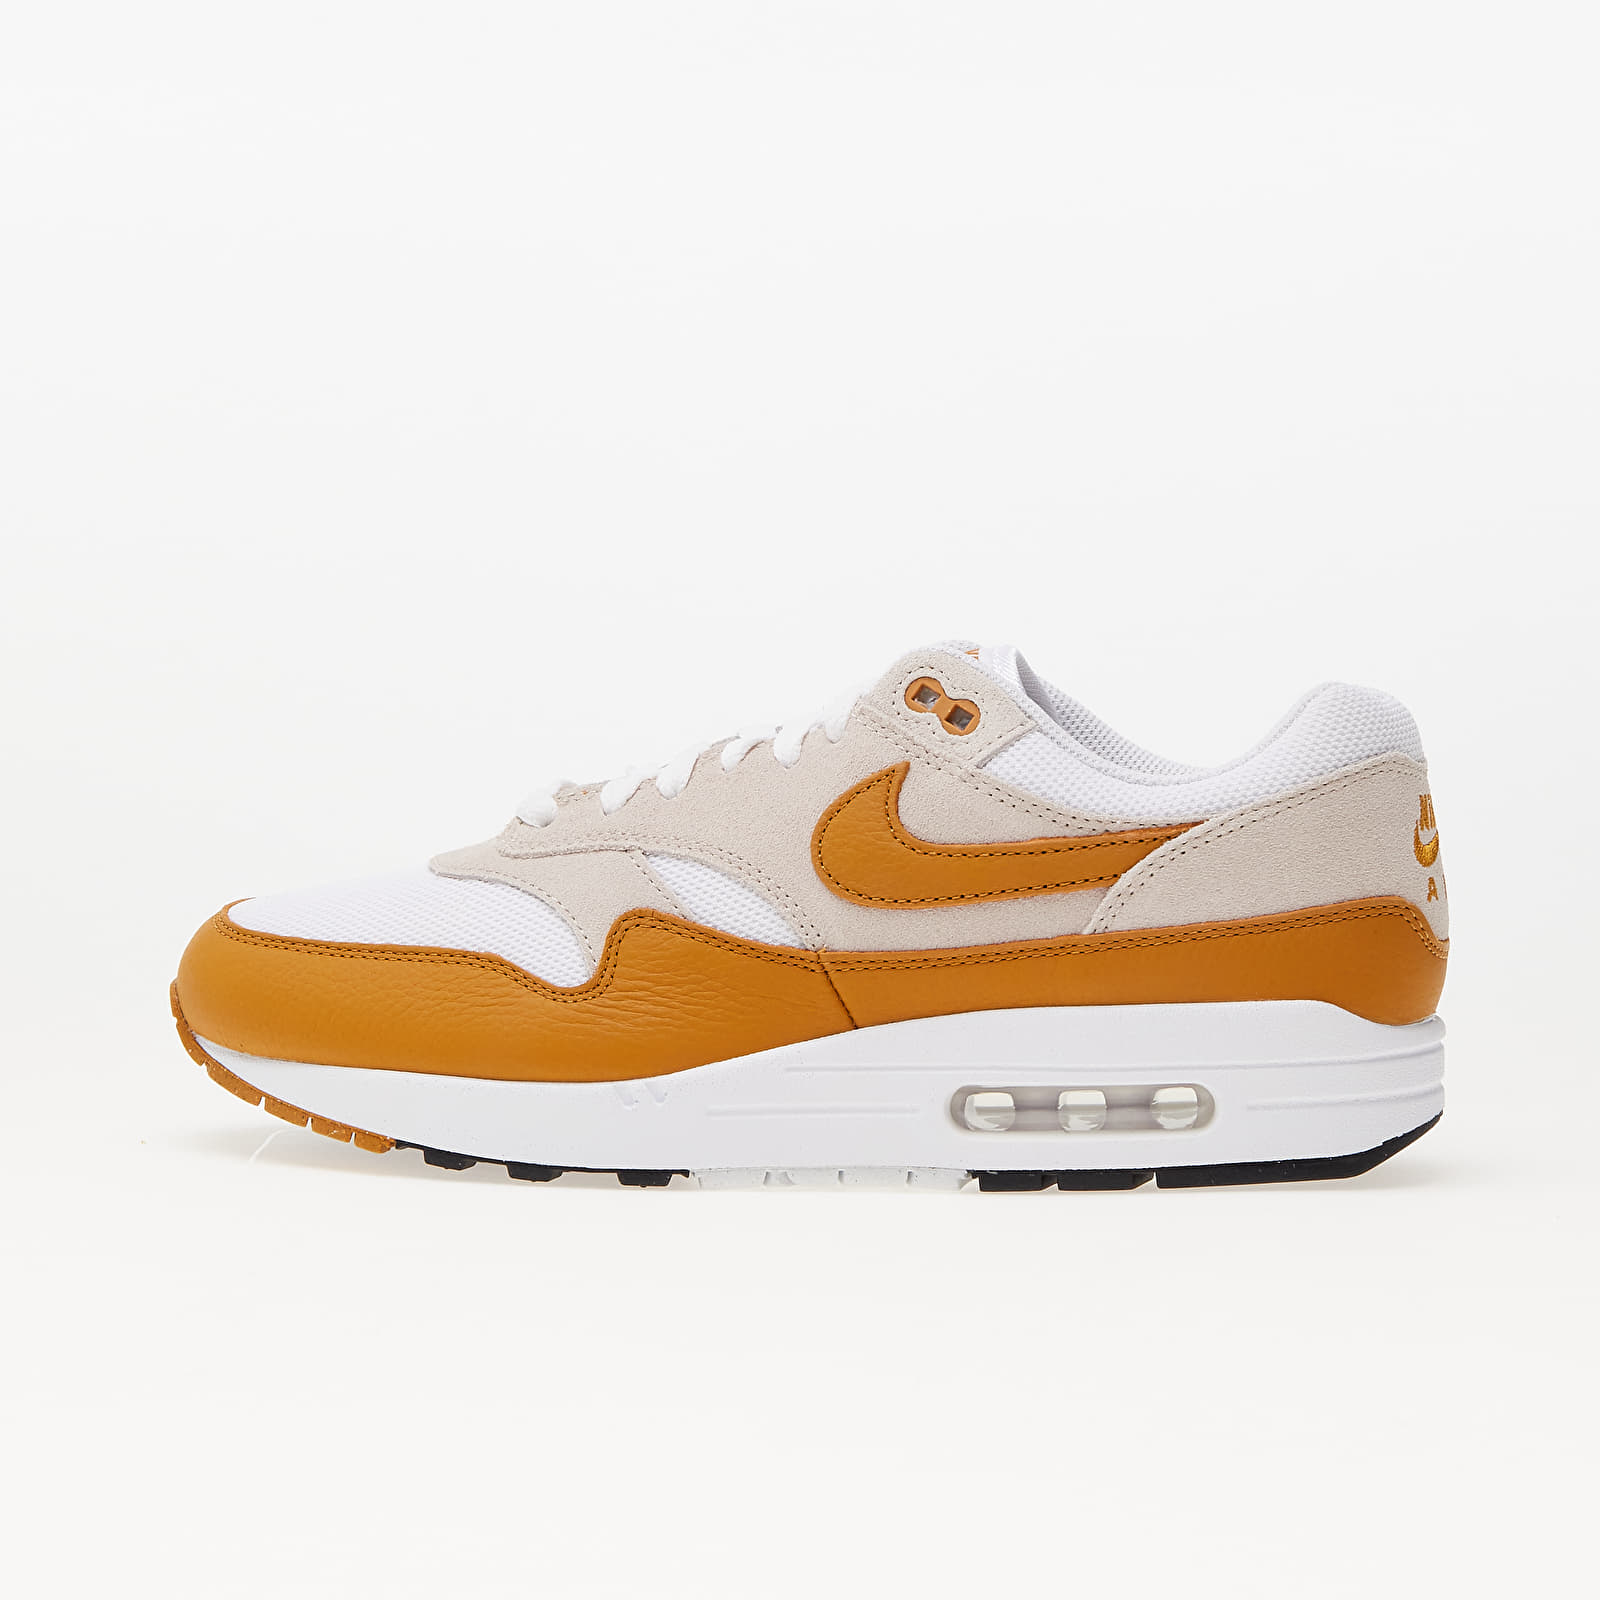 Men's sneakers and shoes Nike Air Max 1 SC Lt Orewood Brn/ Bronze-White-Black